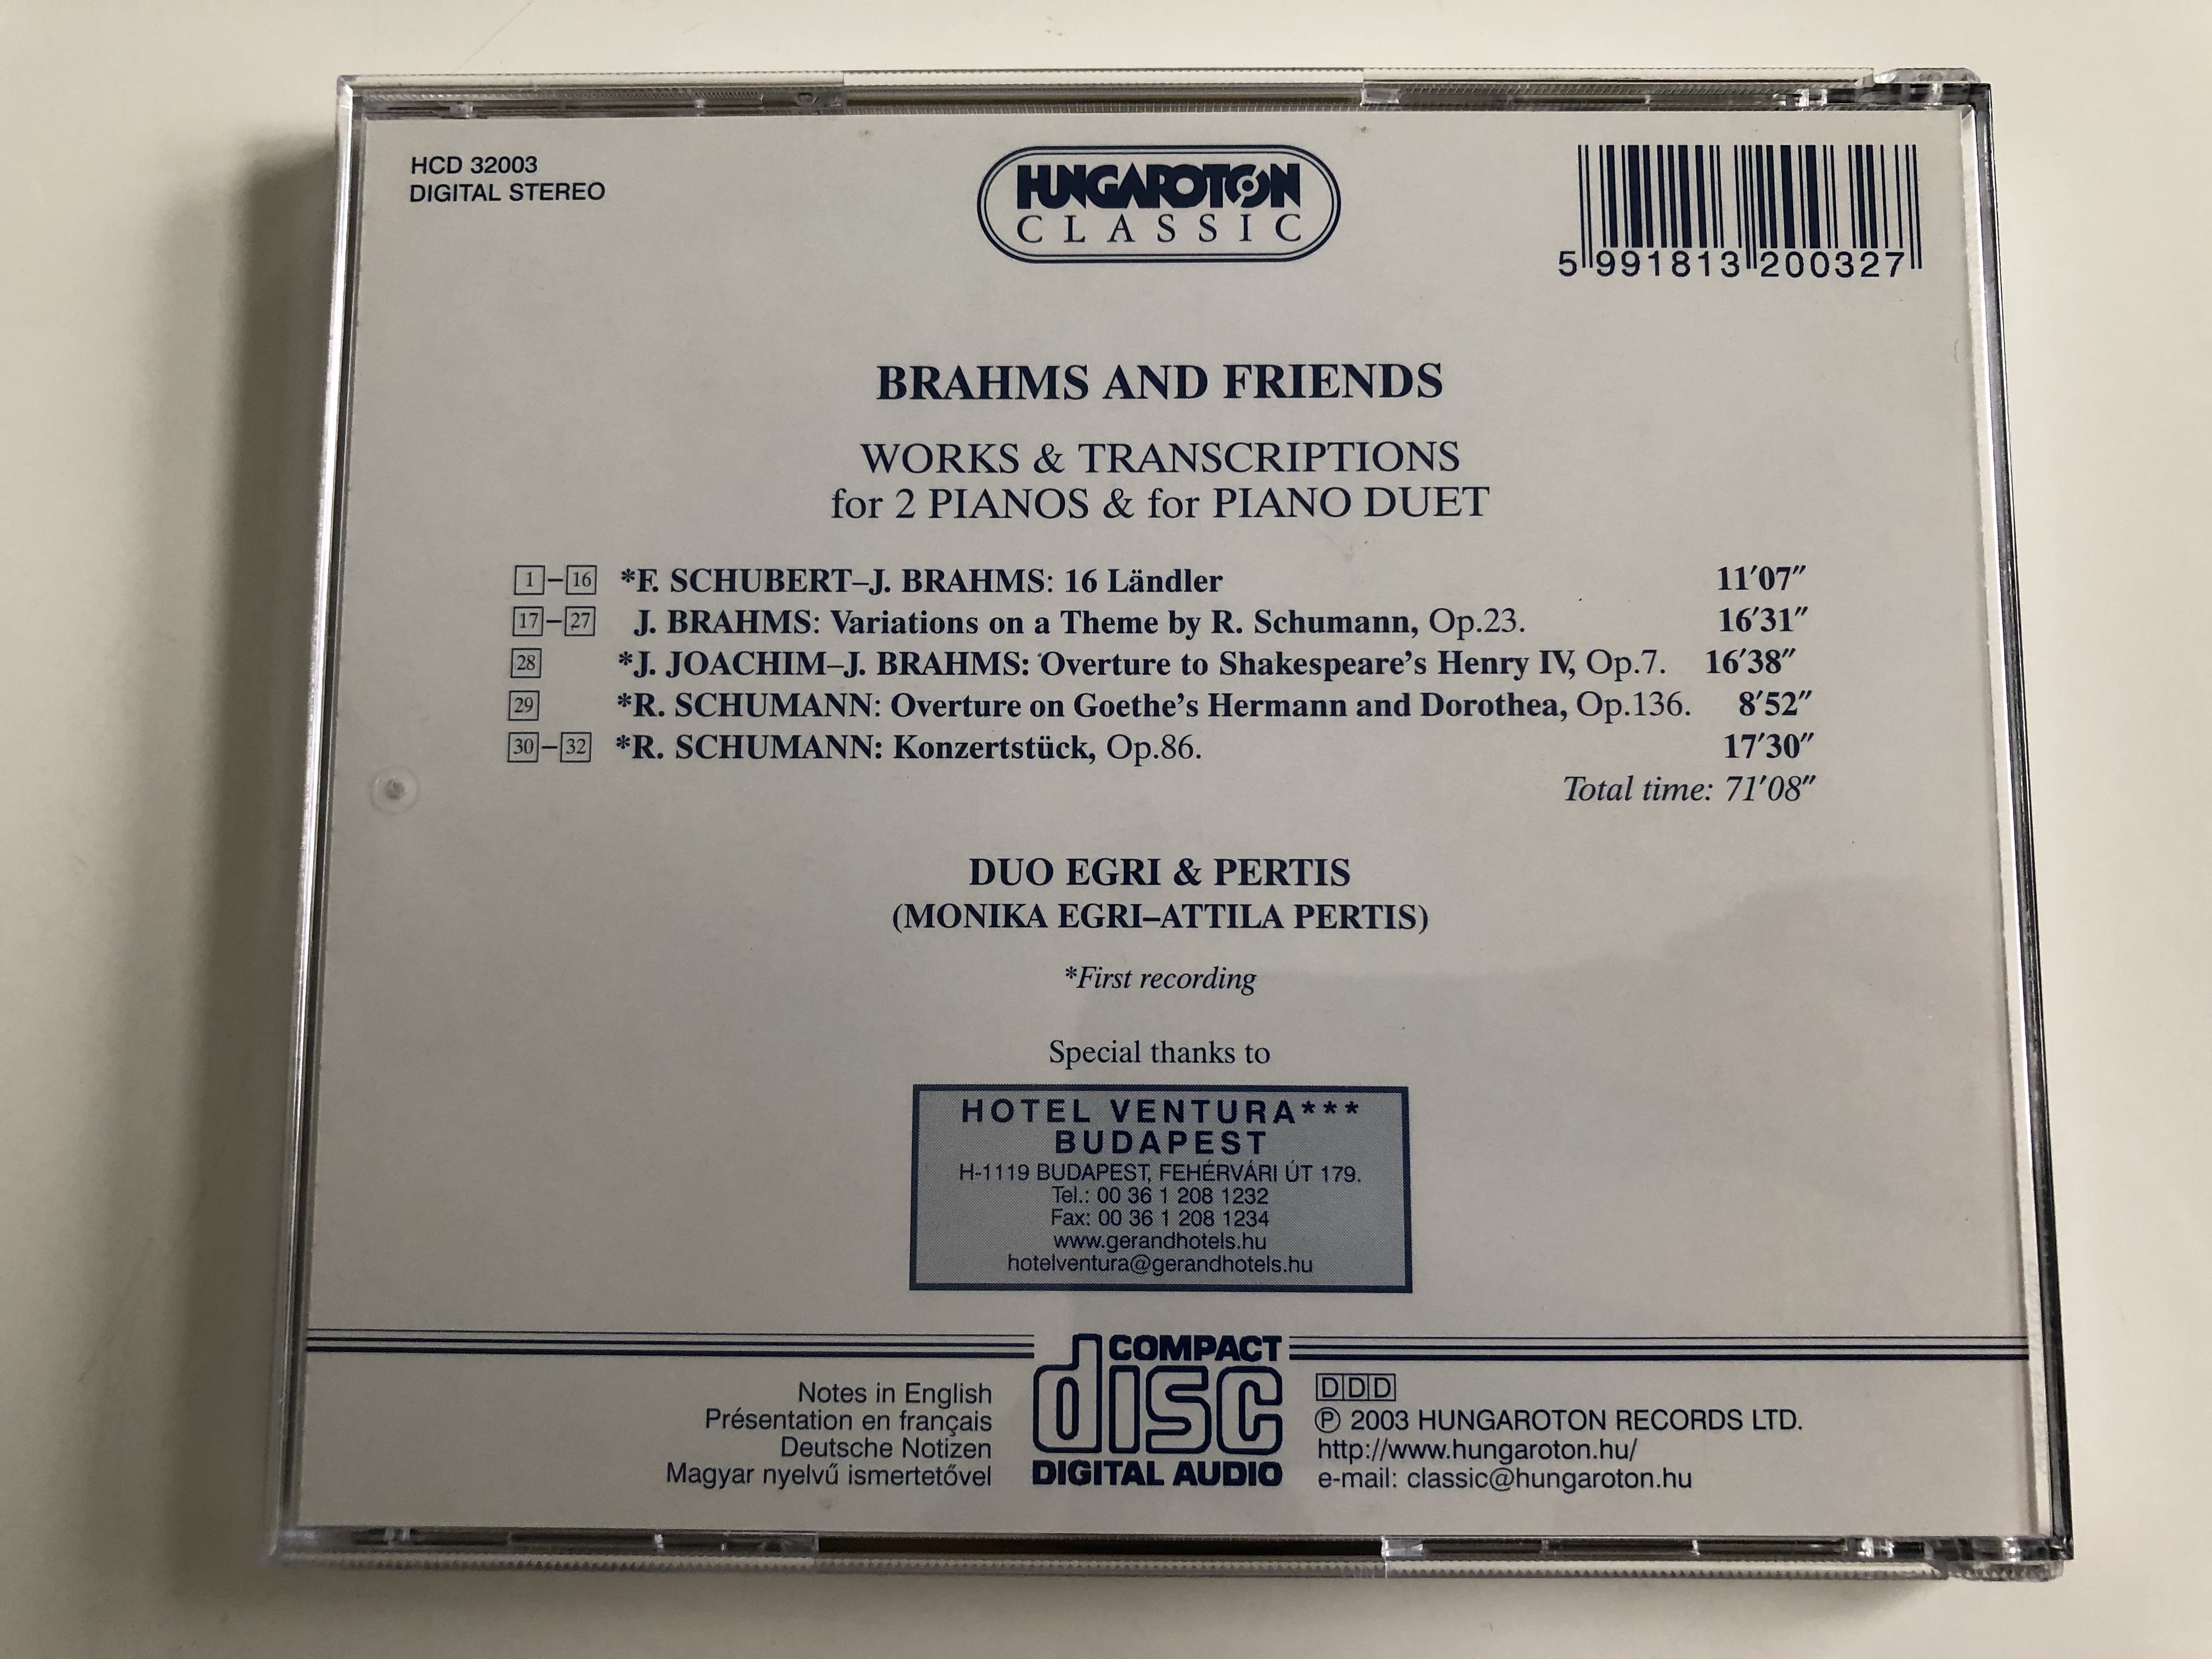 brahms-friends-works-transcriptioons-for-2-pianos-and-for-piano-duet-duo-egri-pertis-hungaroton-audio-cd-2003-stereo-hcd-32003-8-.jpg